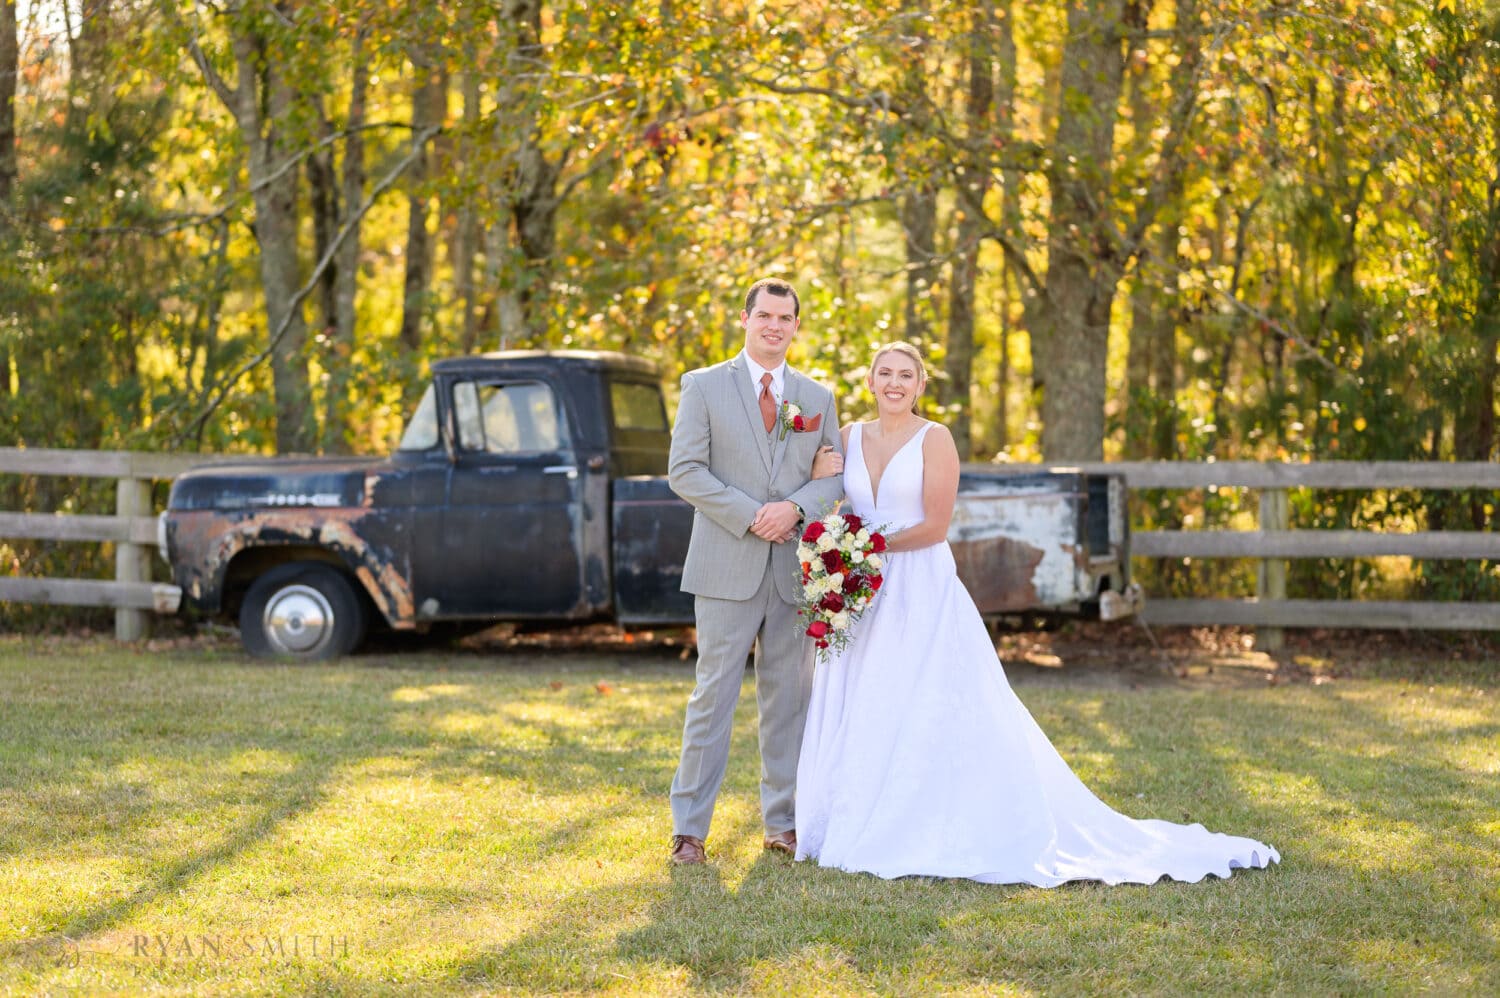 Portraits with the bride and groom in front of the old truck - The Blessed Barn